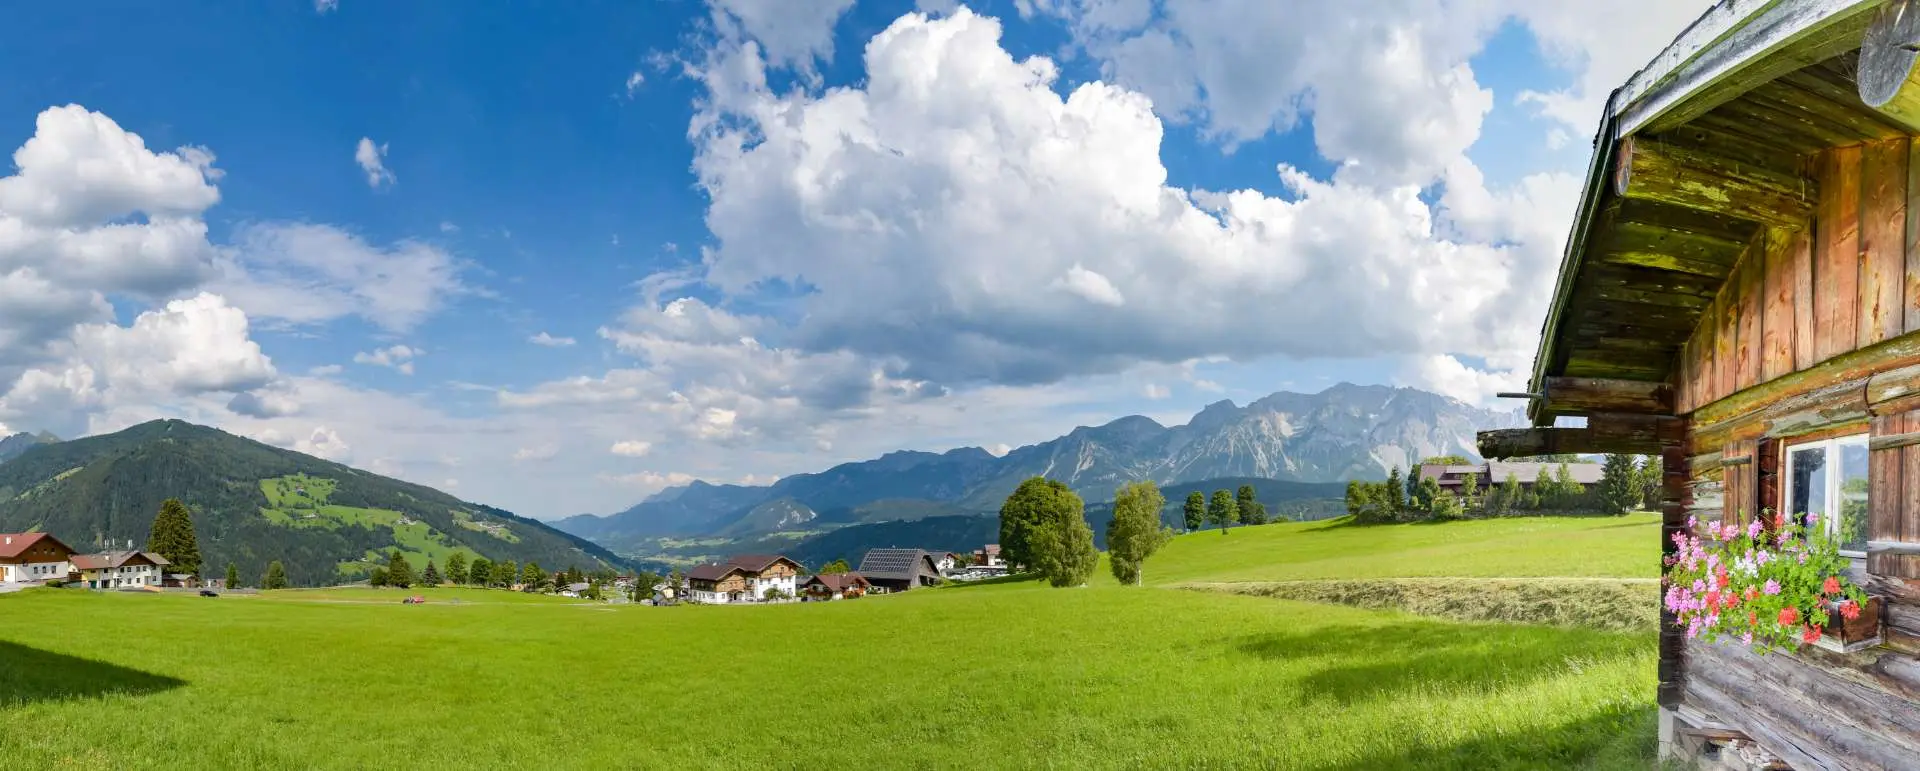 Styria - the destination for affordable group accomodations